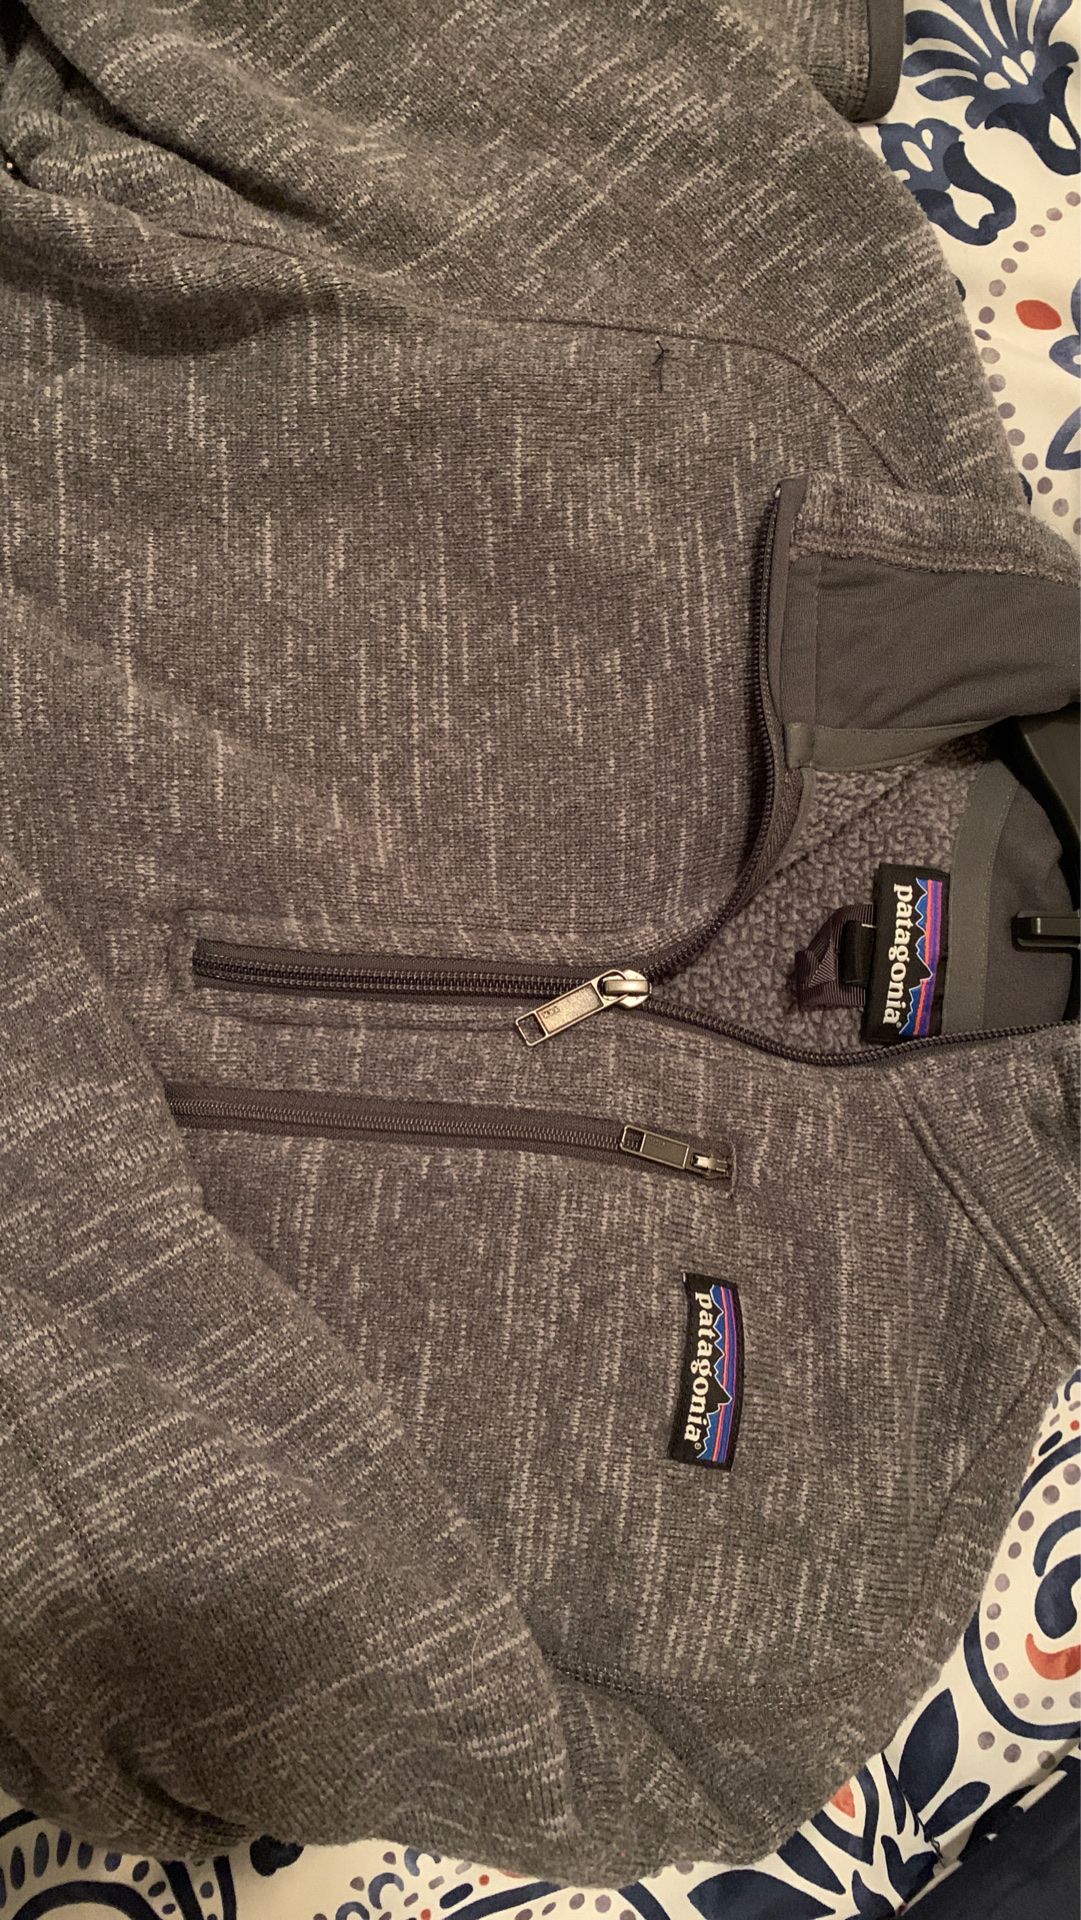 Patagonia sweater size Small